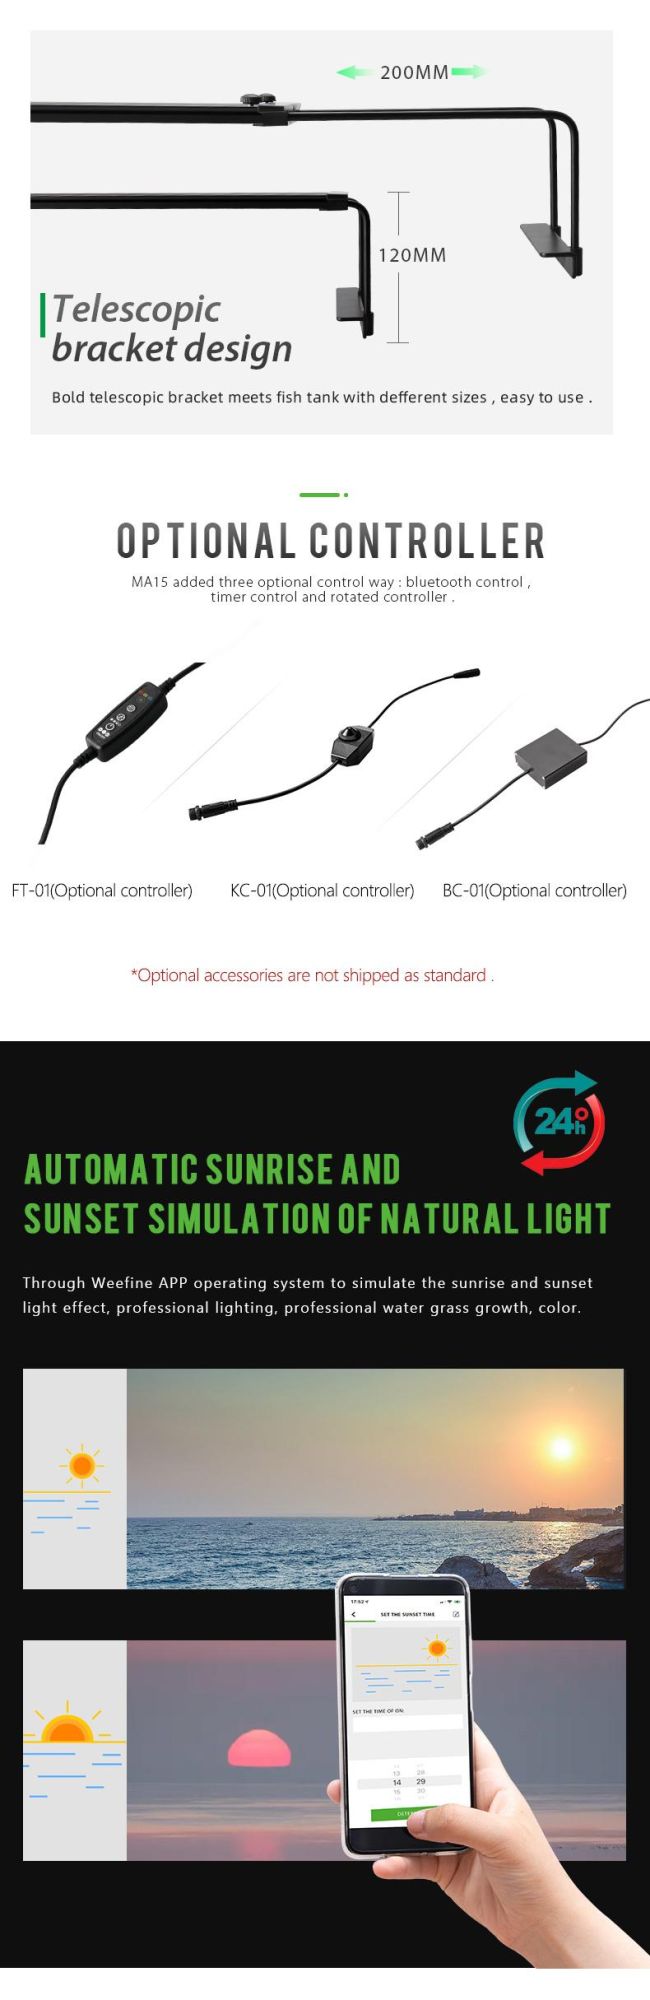 70W Programmable LED Aquarium Light for Coral Reef with Sunset and Sunrise Mode (MA15)